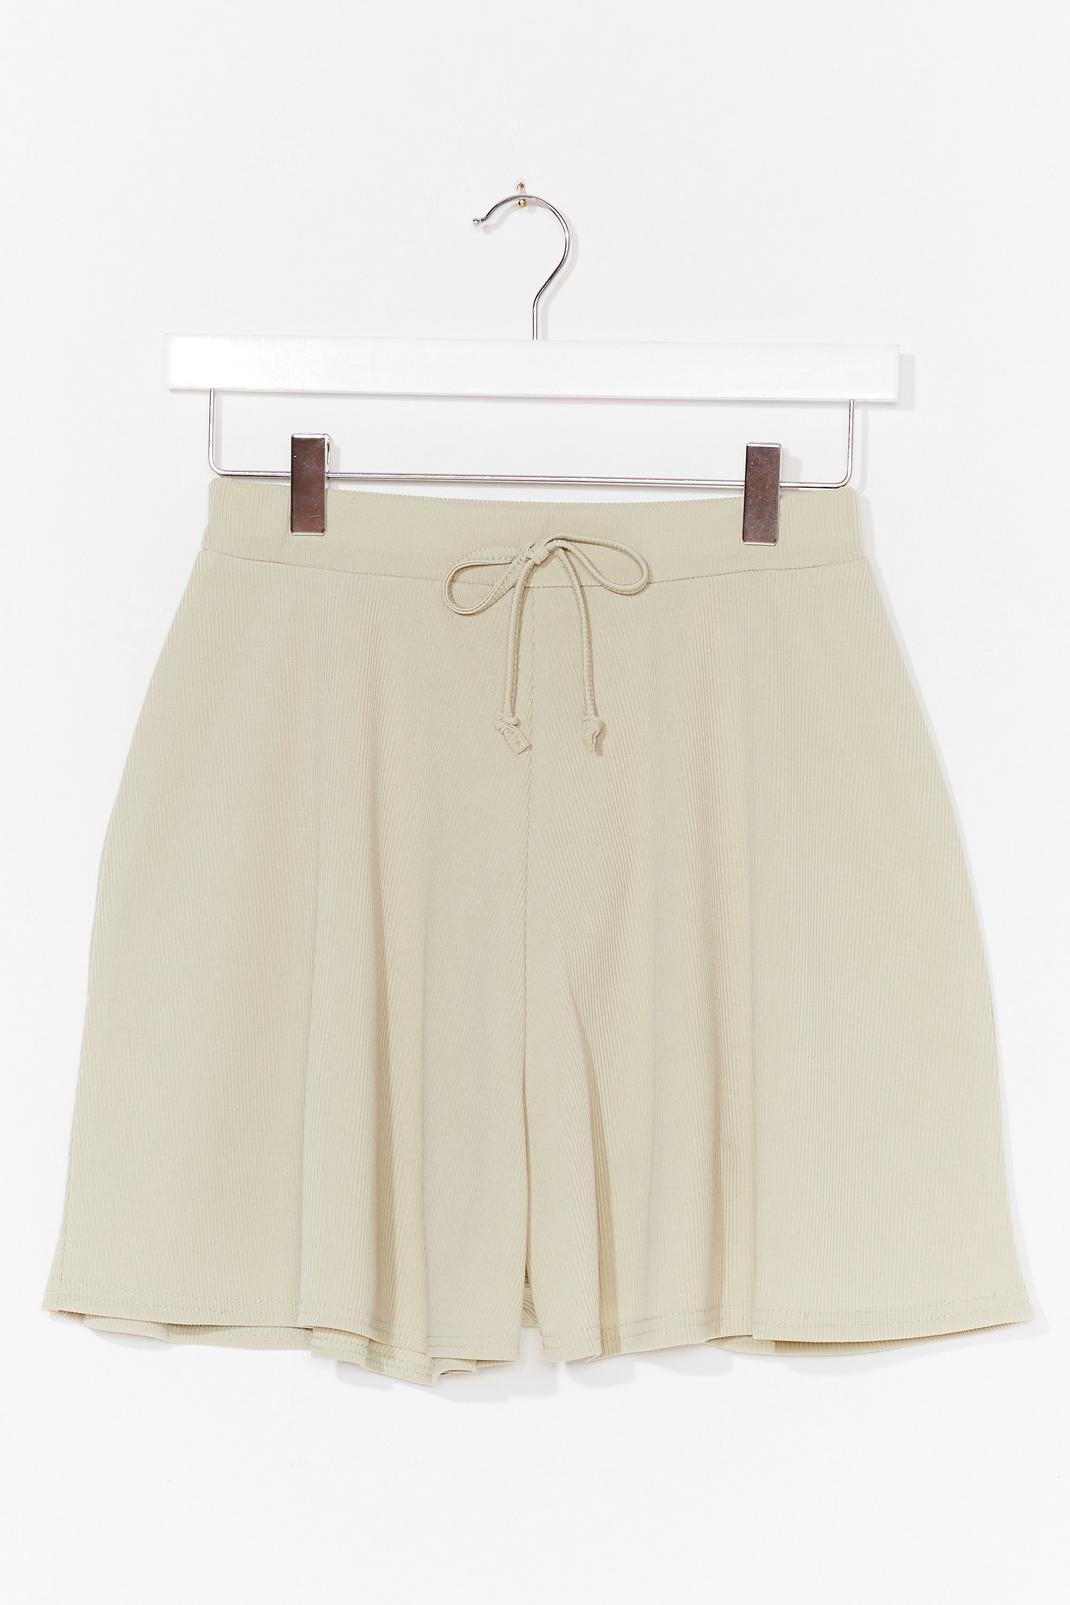 Tie Up Loose Ends Ribbed High-Waisted Shorts image number 1